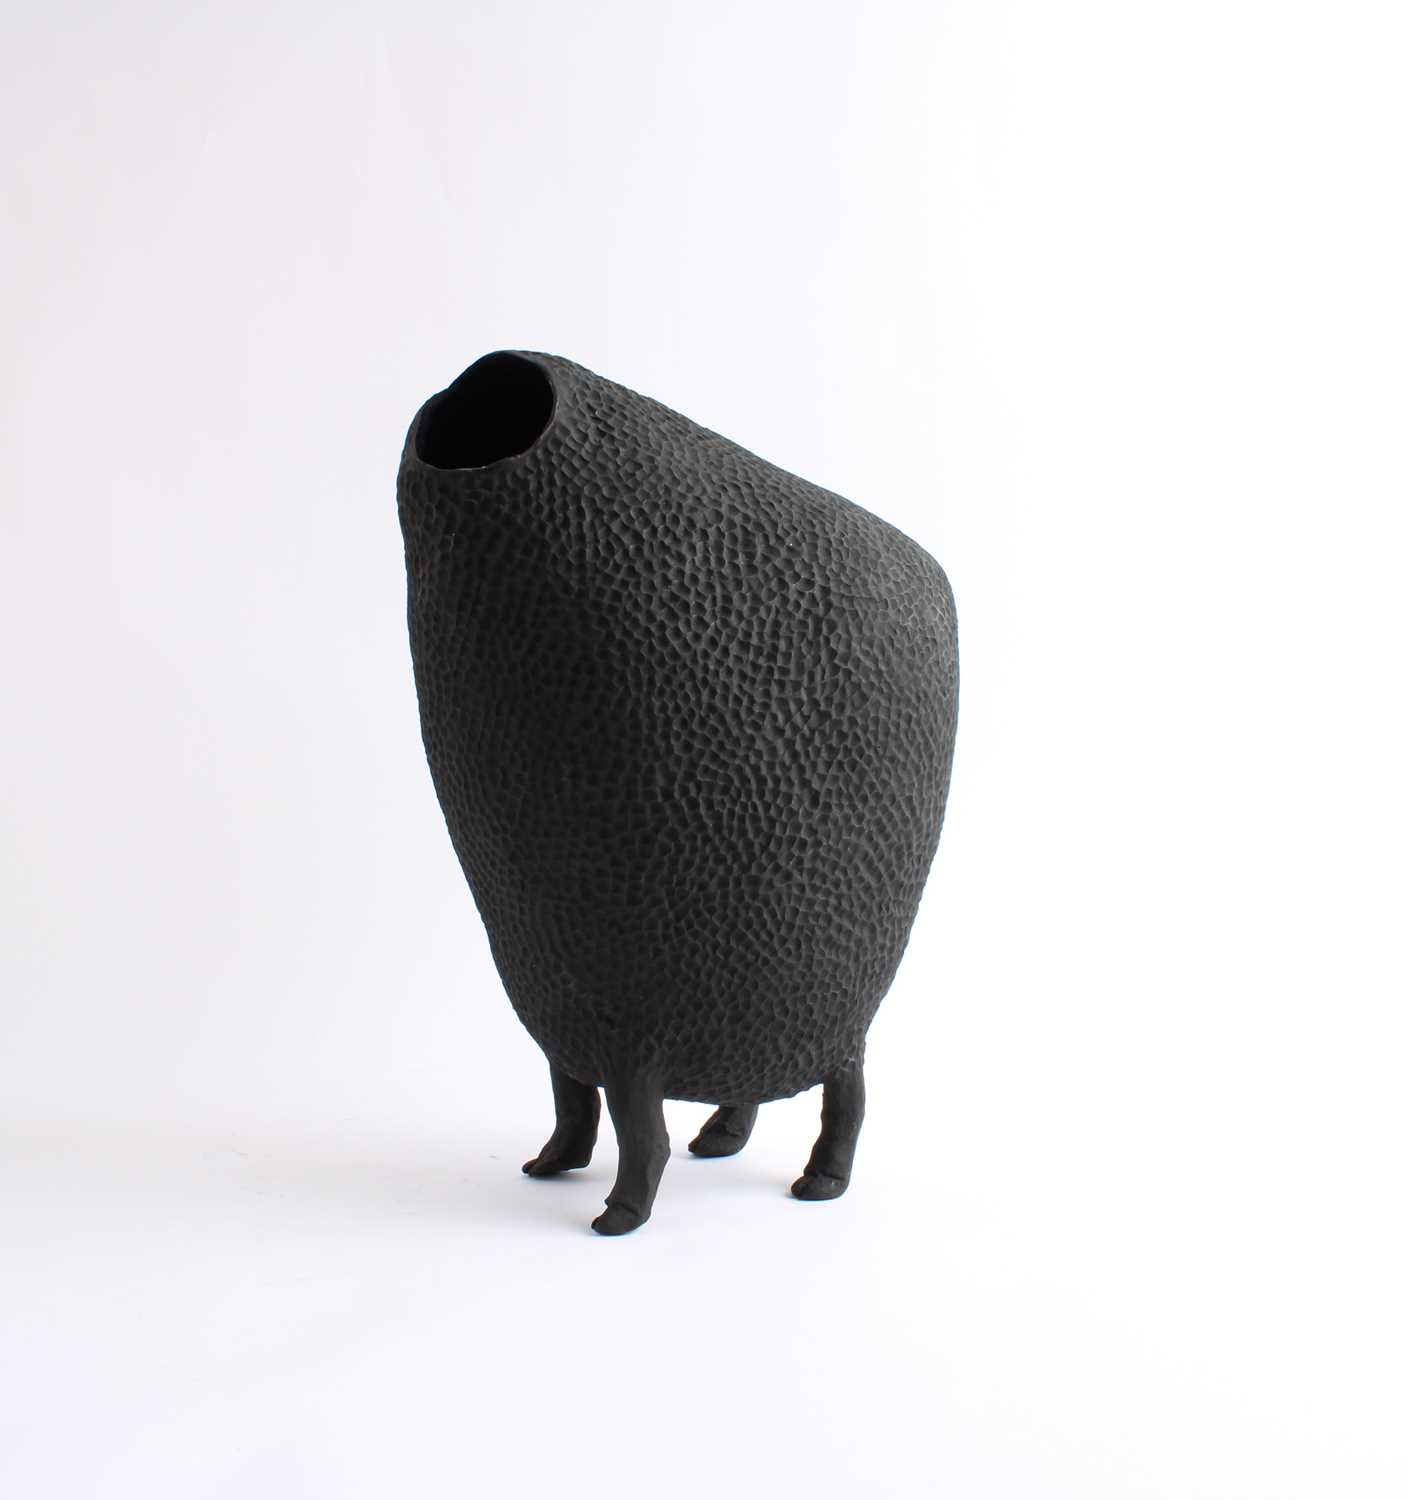 Ana Silva (Guatemala 1982-) Footed Vessel, From the Series "Tzukxul III" ("Sheep" in Q`eqchí) - Image 2 of 5